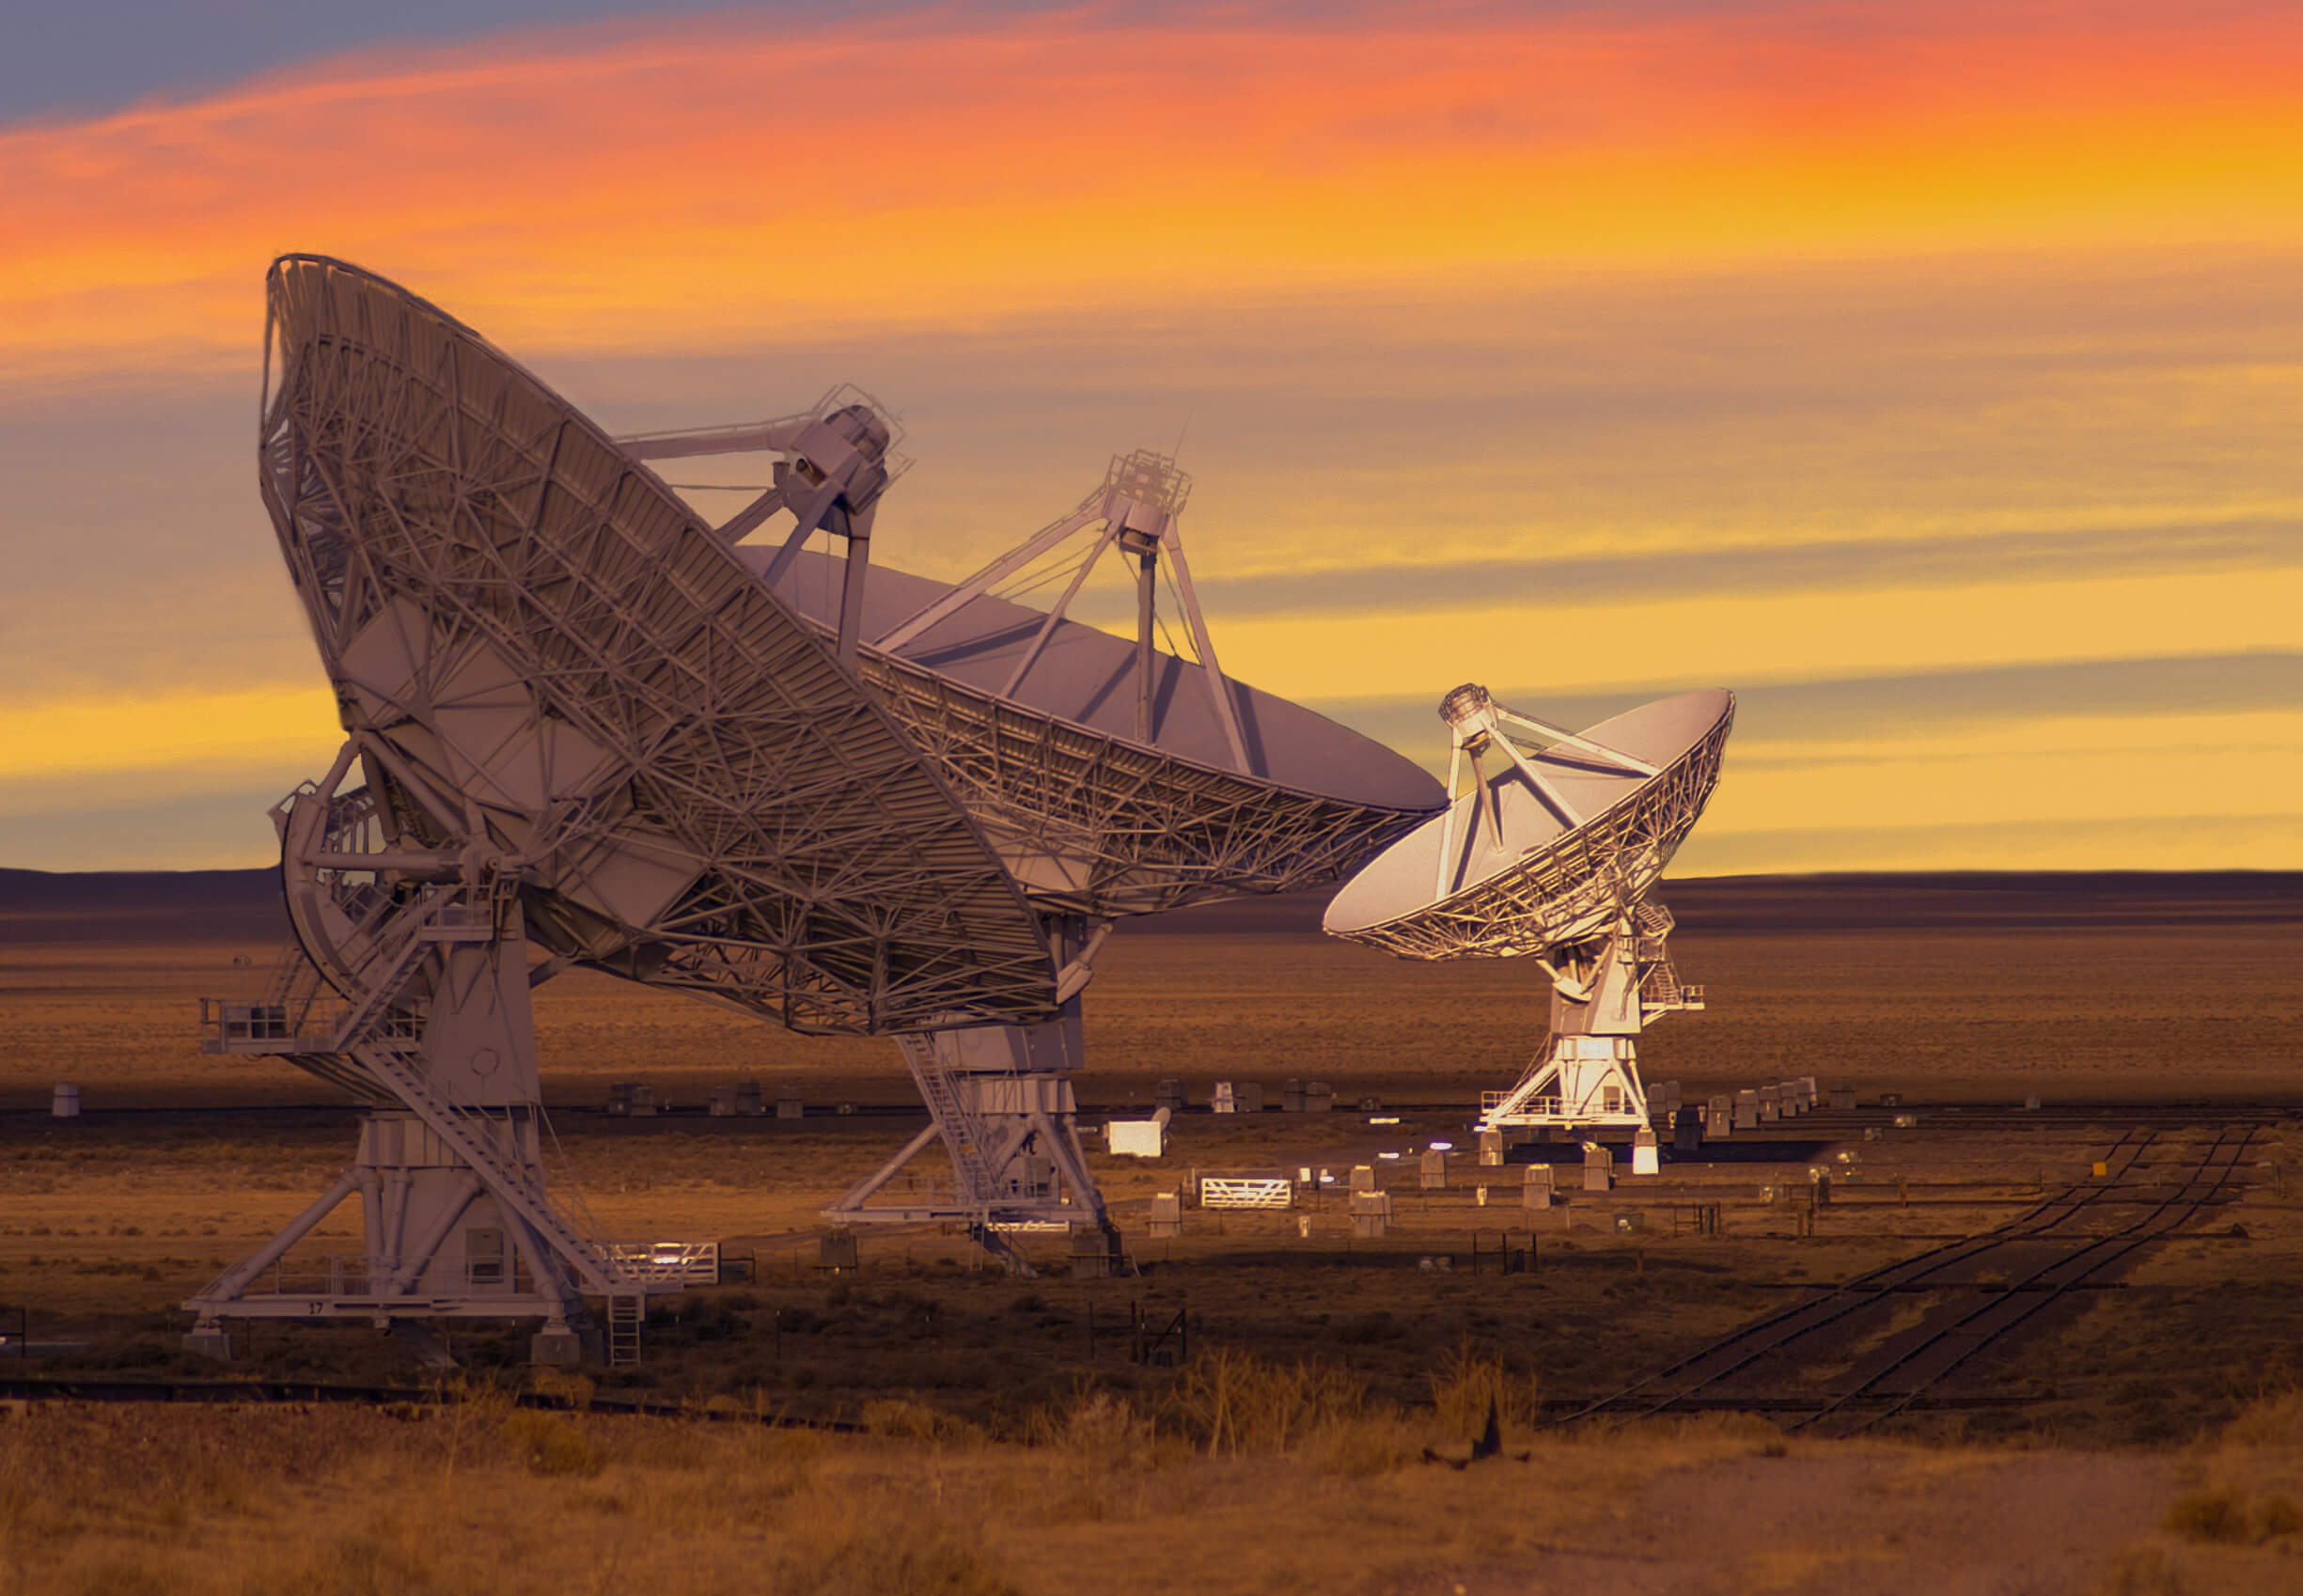 A section of the very large array - a concentration of radio telescopes used, among other things, to search for radio signals from aliens. Photo: shutterstock